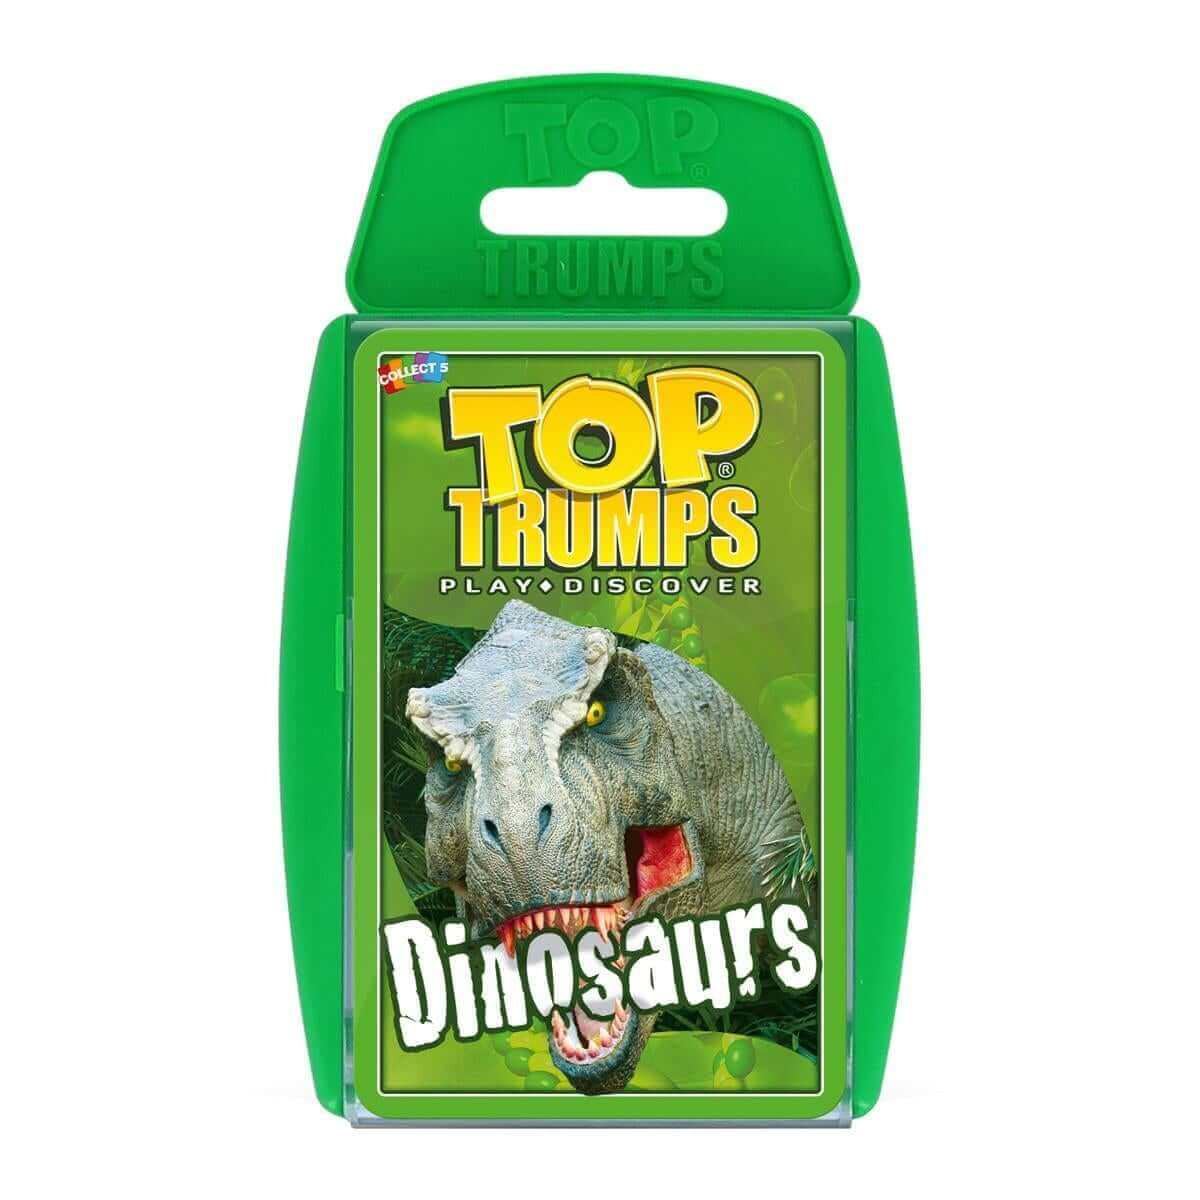 Top Trumps Card Game Dinosaurs